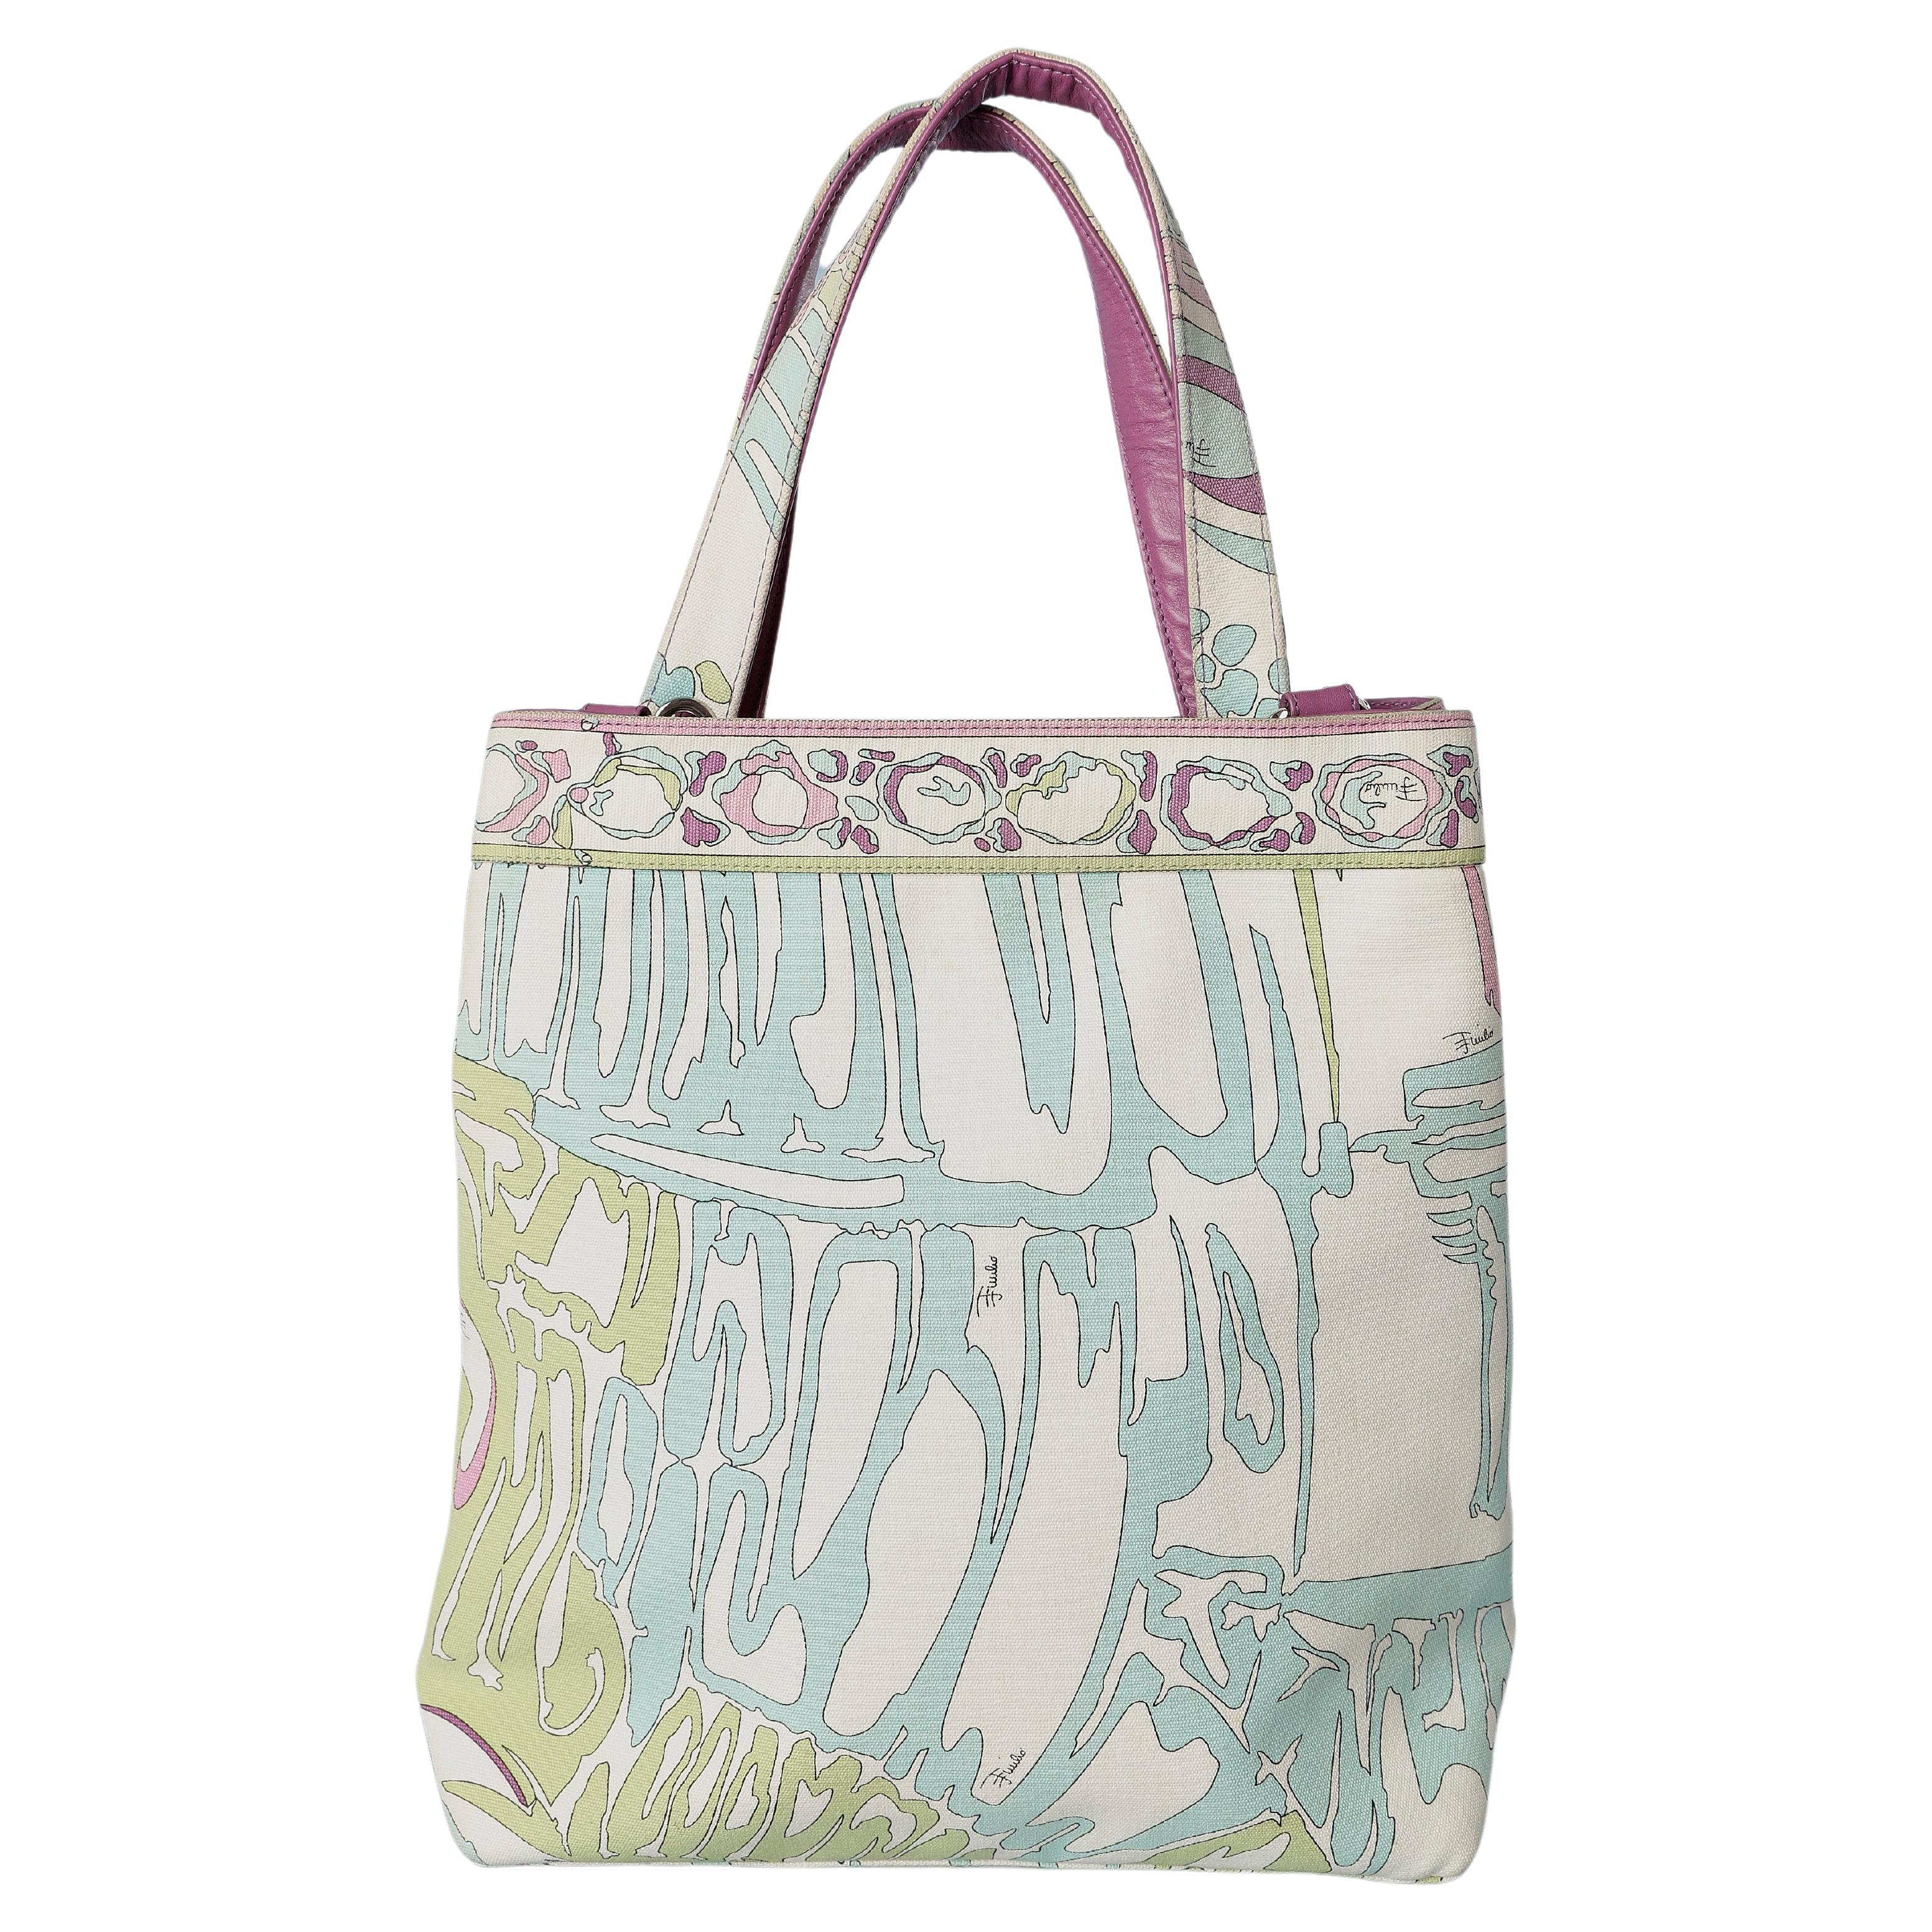 Printed and branded canvas hand-bag Emilio Pucci 